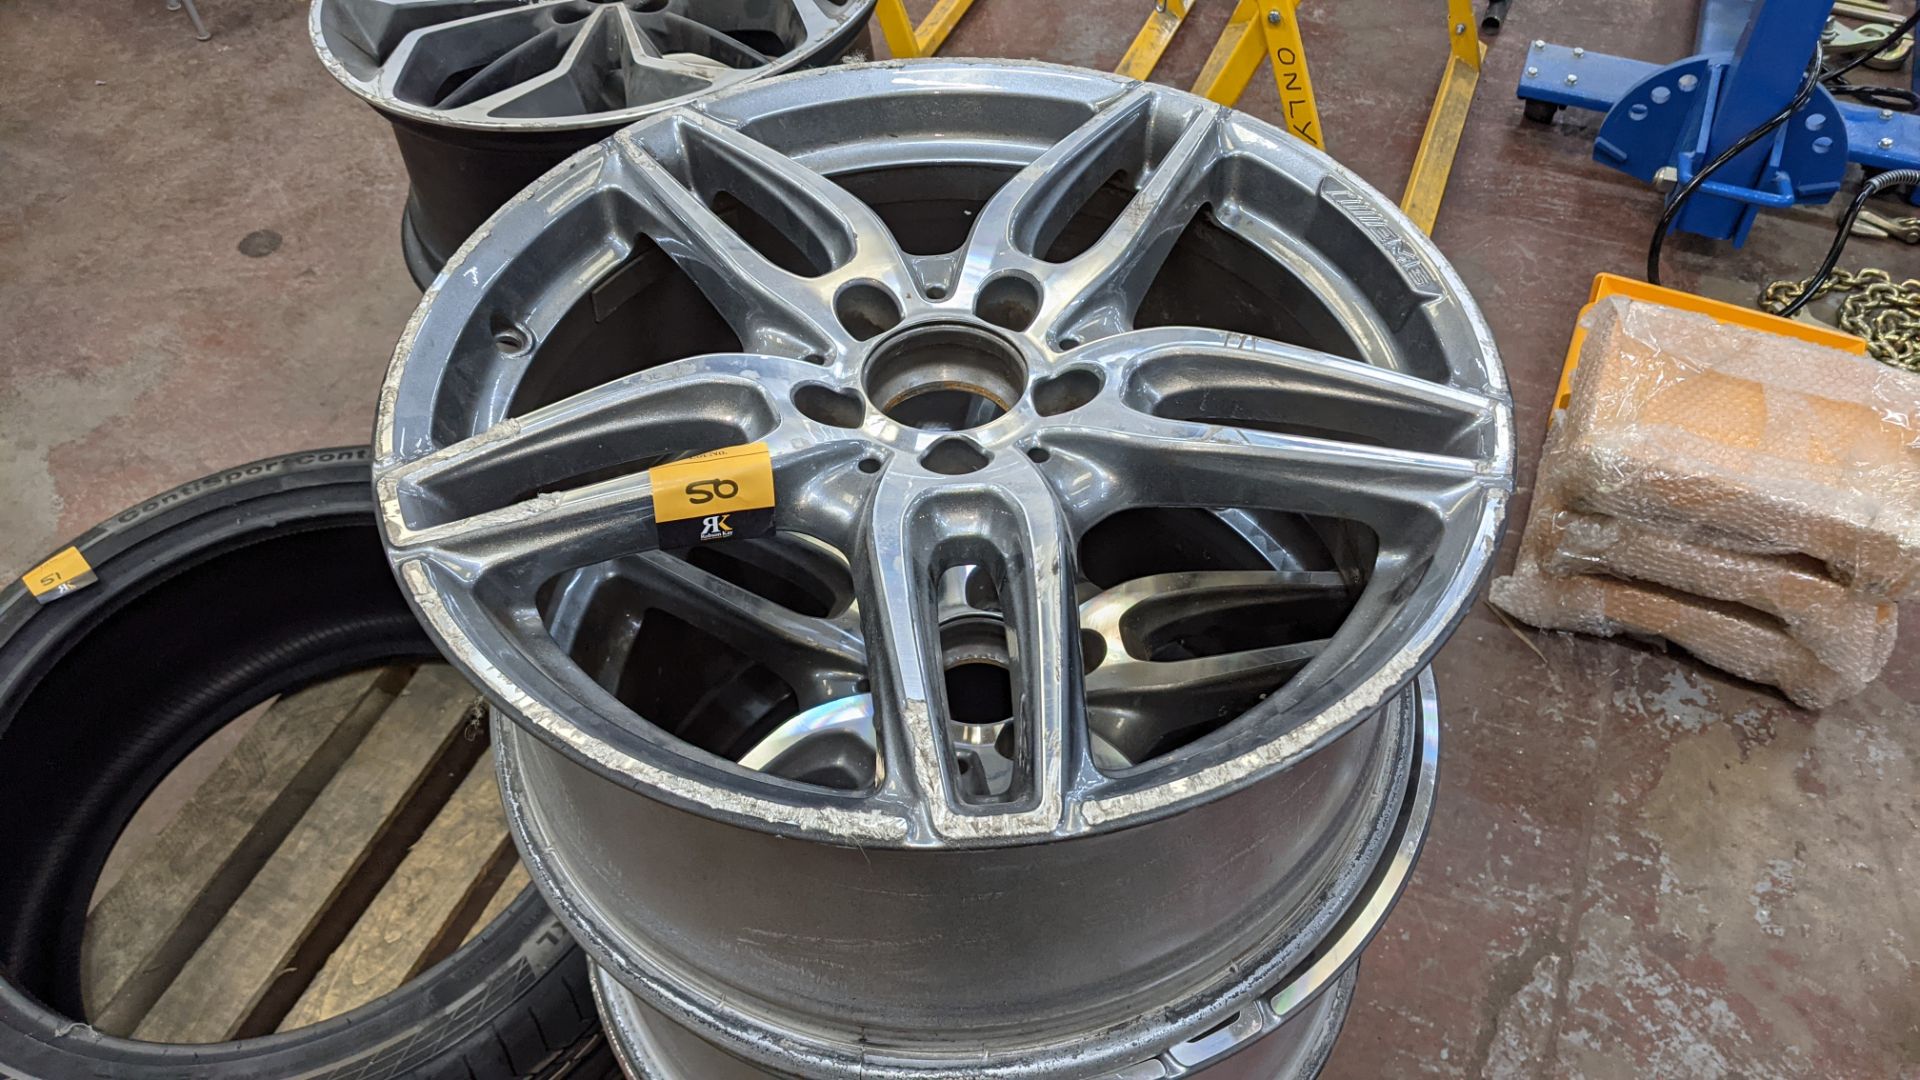 Set of 4 AMG 19" alloy wheels in 2 tone grey painted & silver polished finish - Image 3 of 16